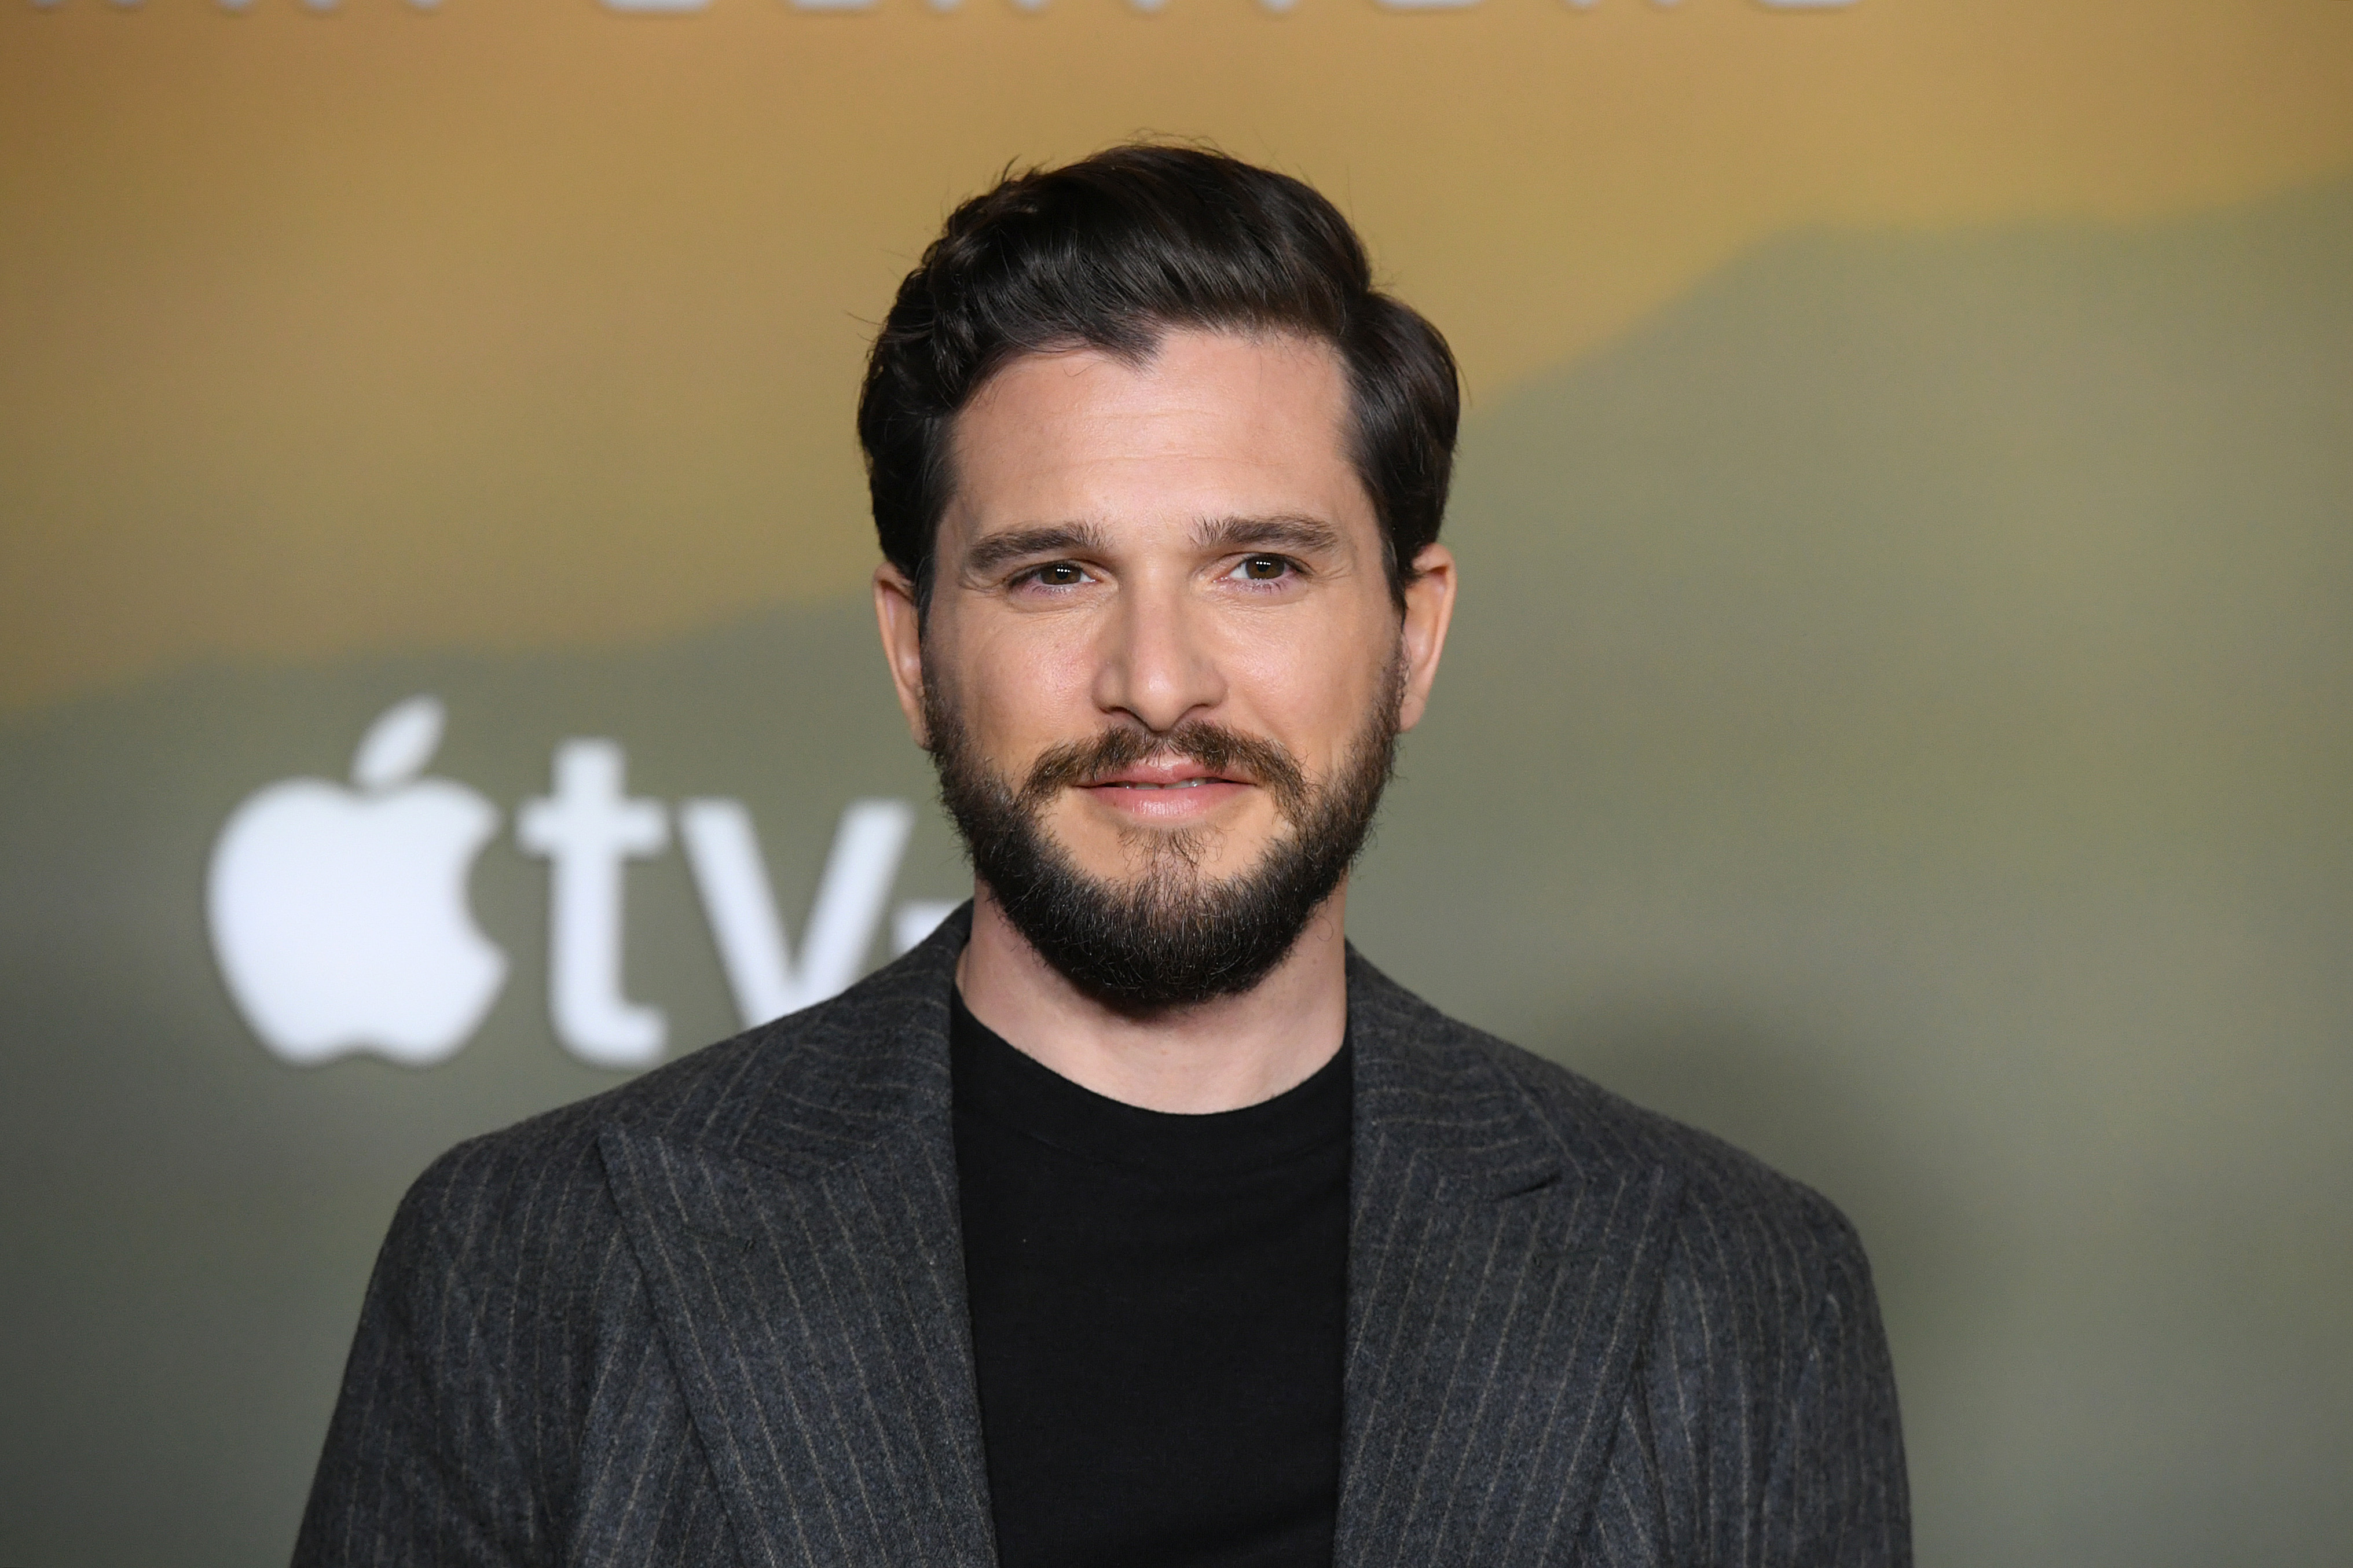 Kit Harrington attends the red carpet premiere of the Apple Original Series "Extrapolations" at Hammer Museum in Los Angeles, California